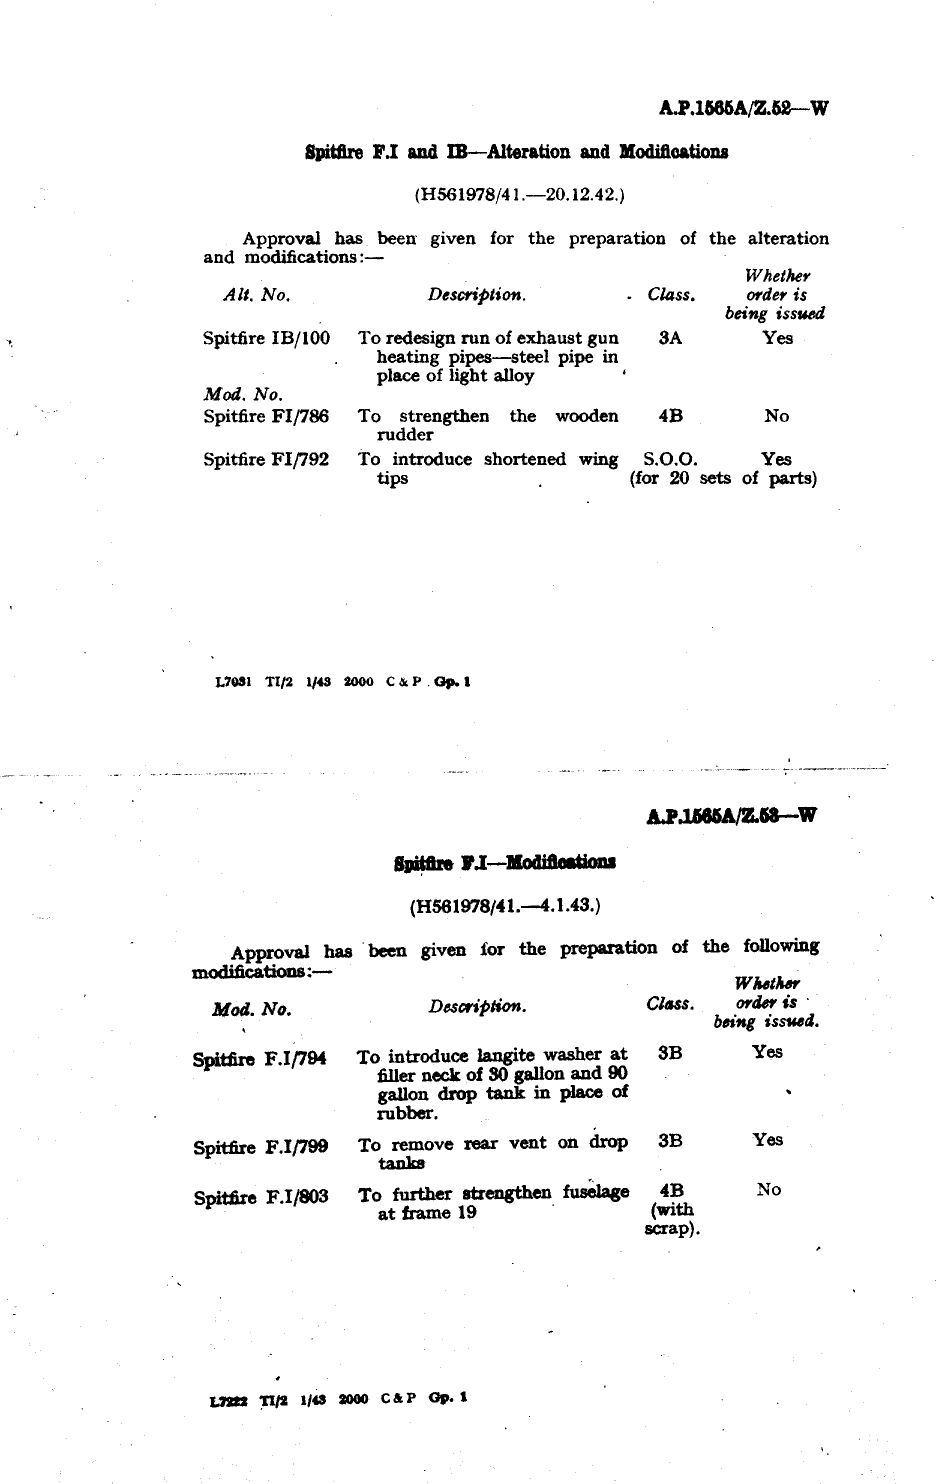 Sample page 1 from AirCorps Library document: Spitfire F.I Modifications 794, 799, and 803